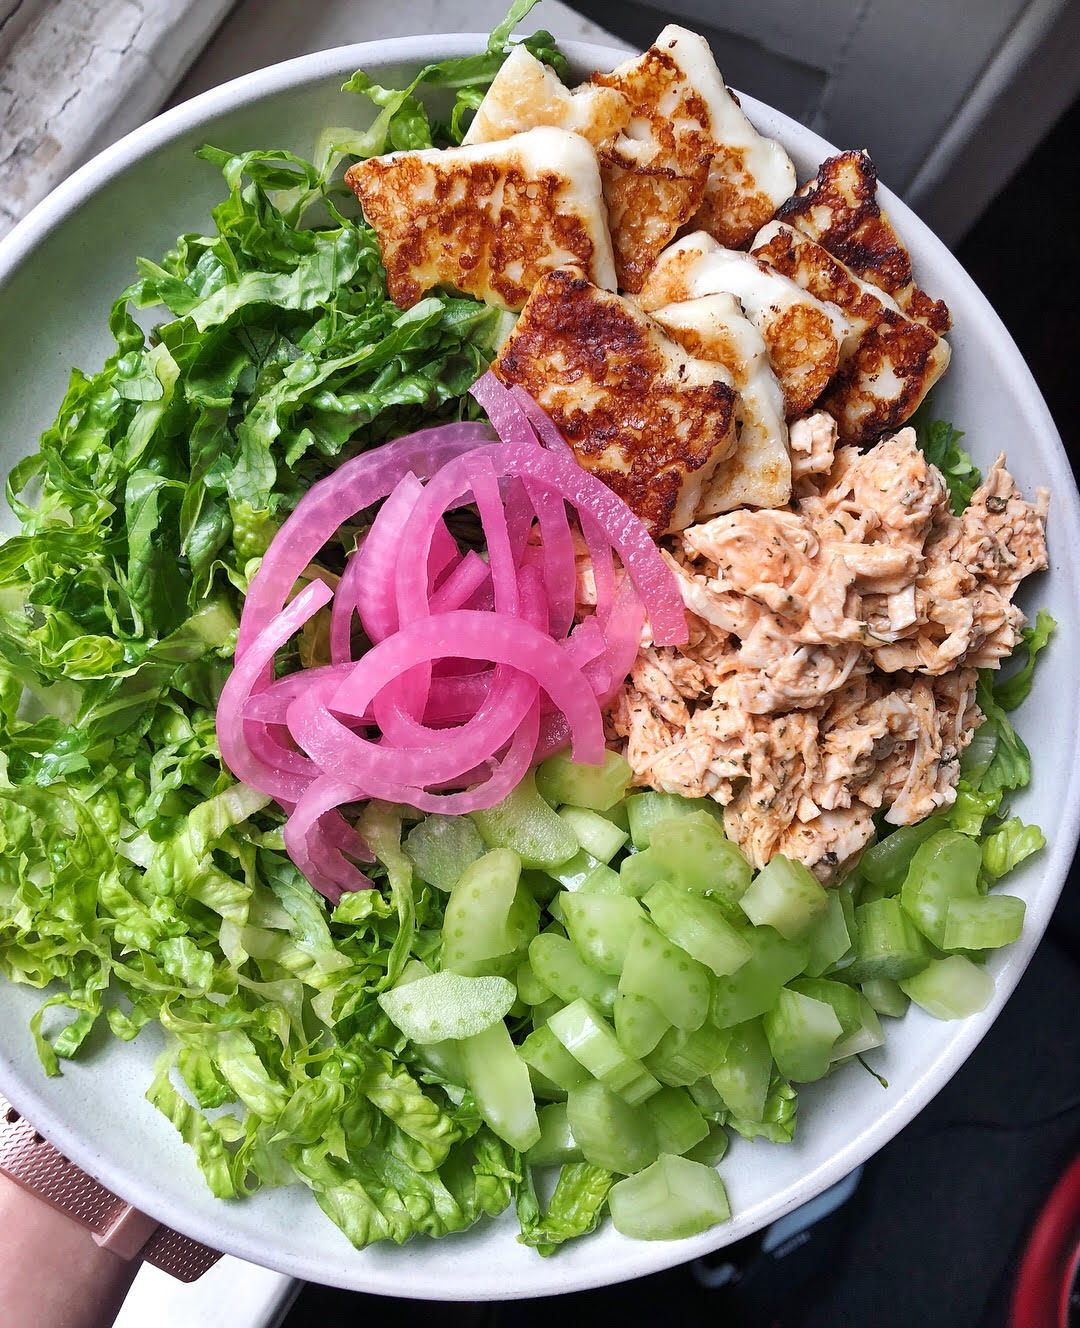 Above view of a salad with romaine lettuce, pickled red onions, halloumi cheese and shredded buffalo chicken